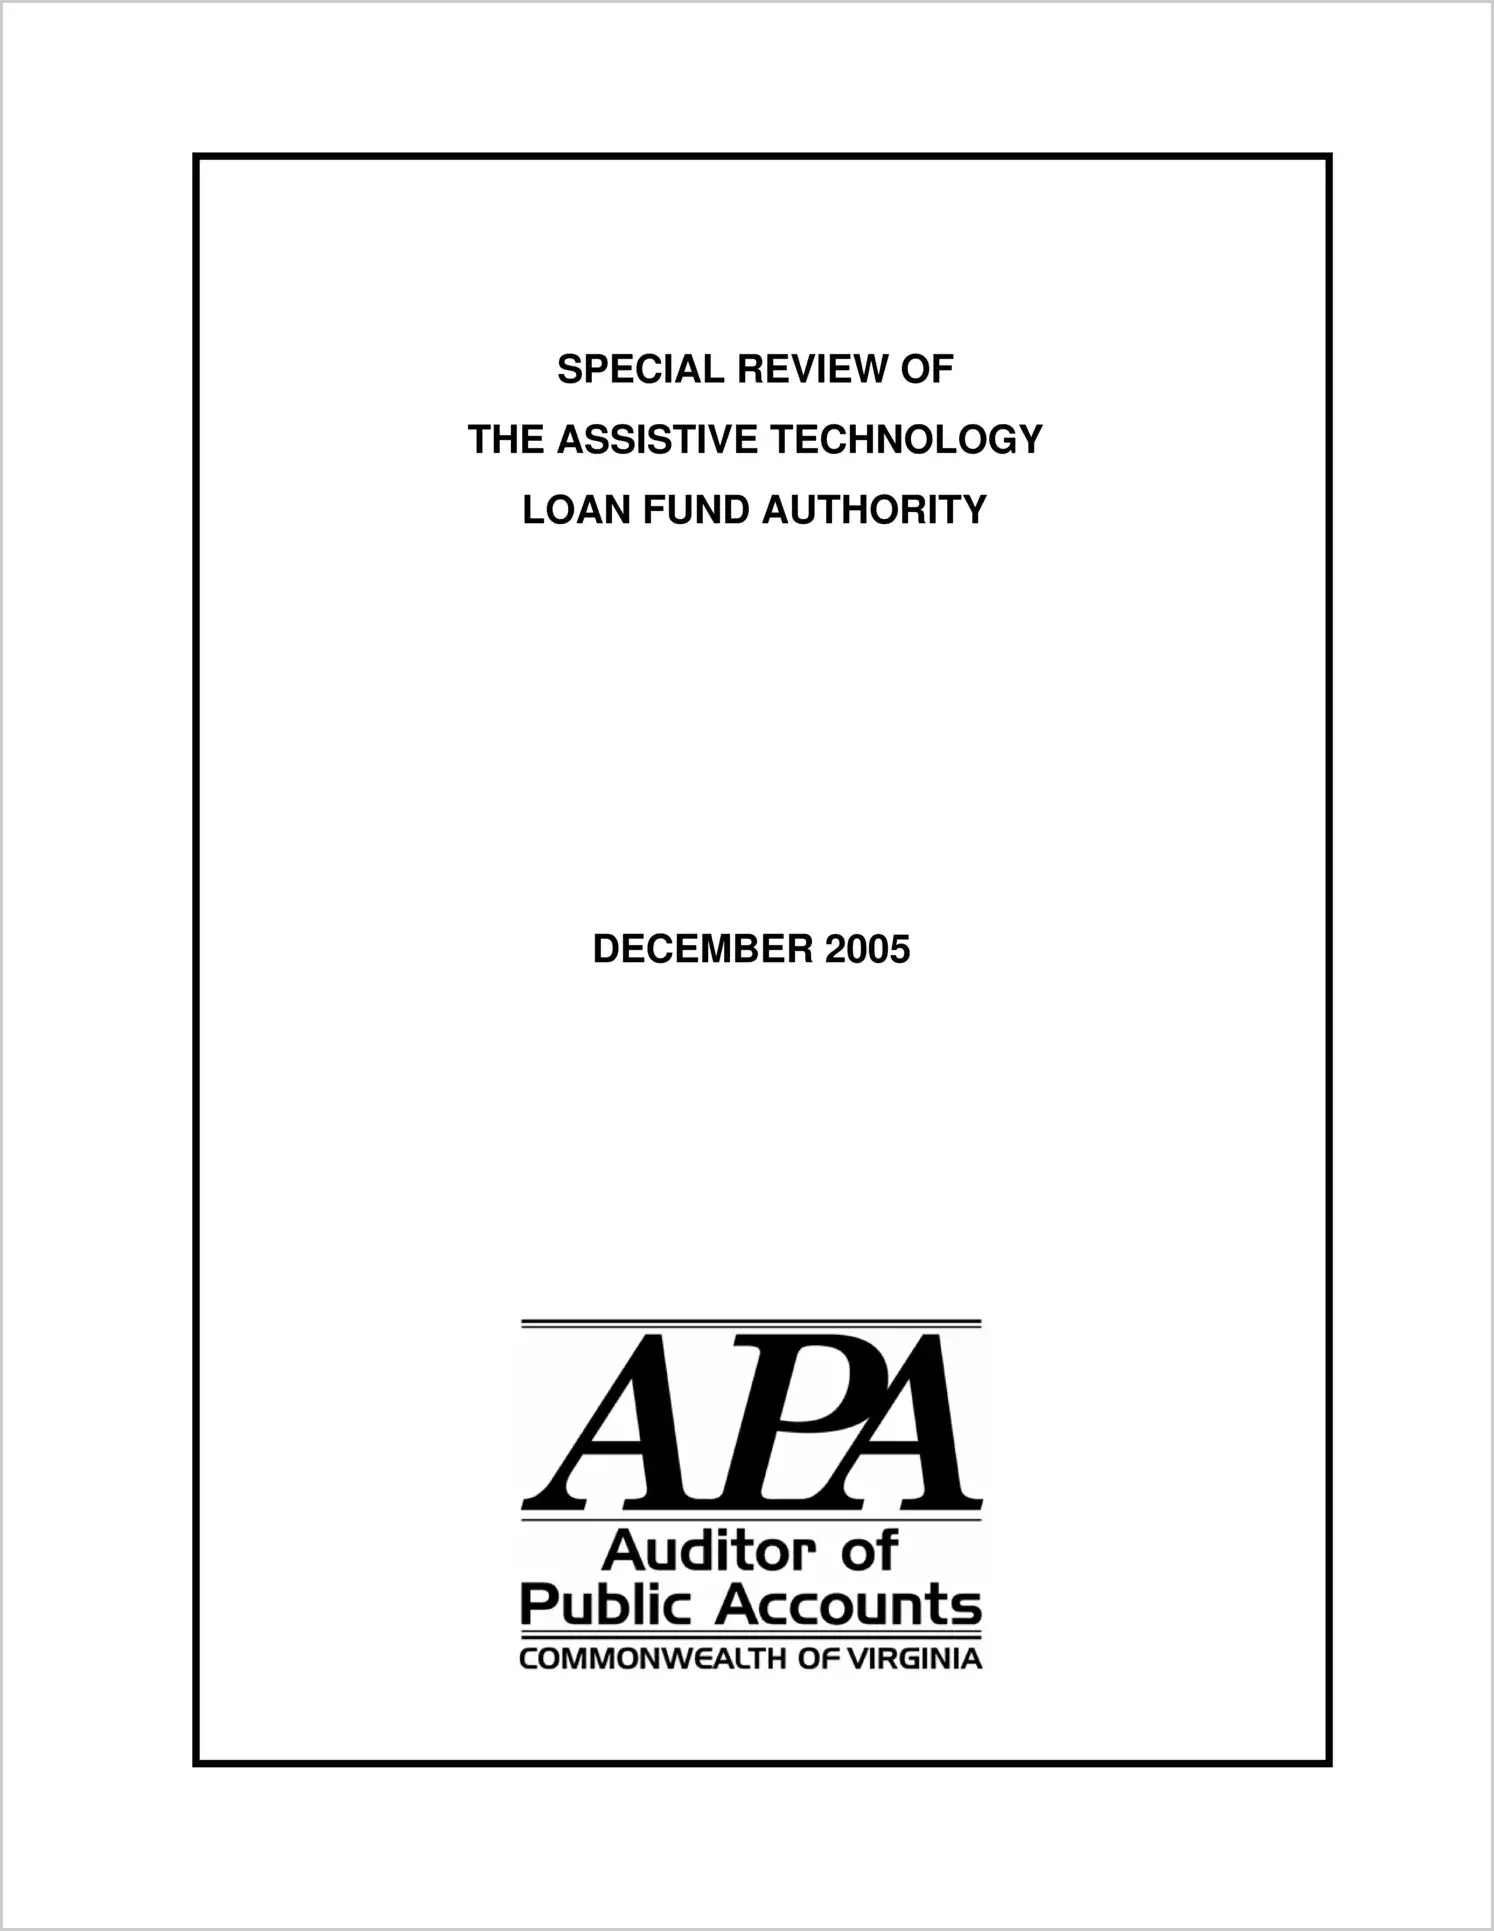 Special Review of the Assistive Technology Loan Fund Authority dated December 2005